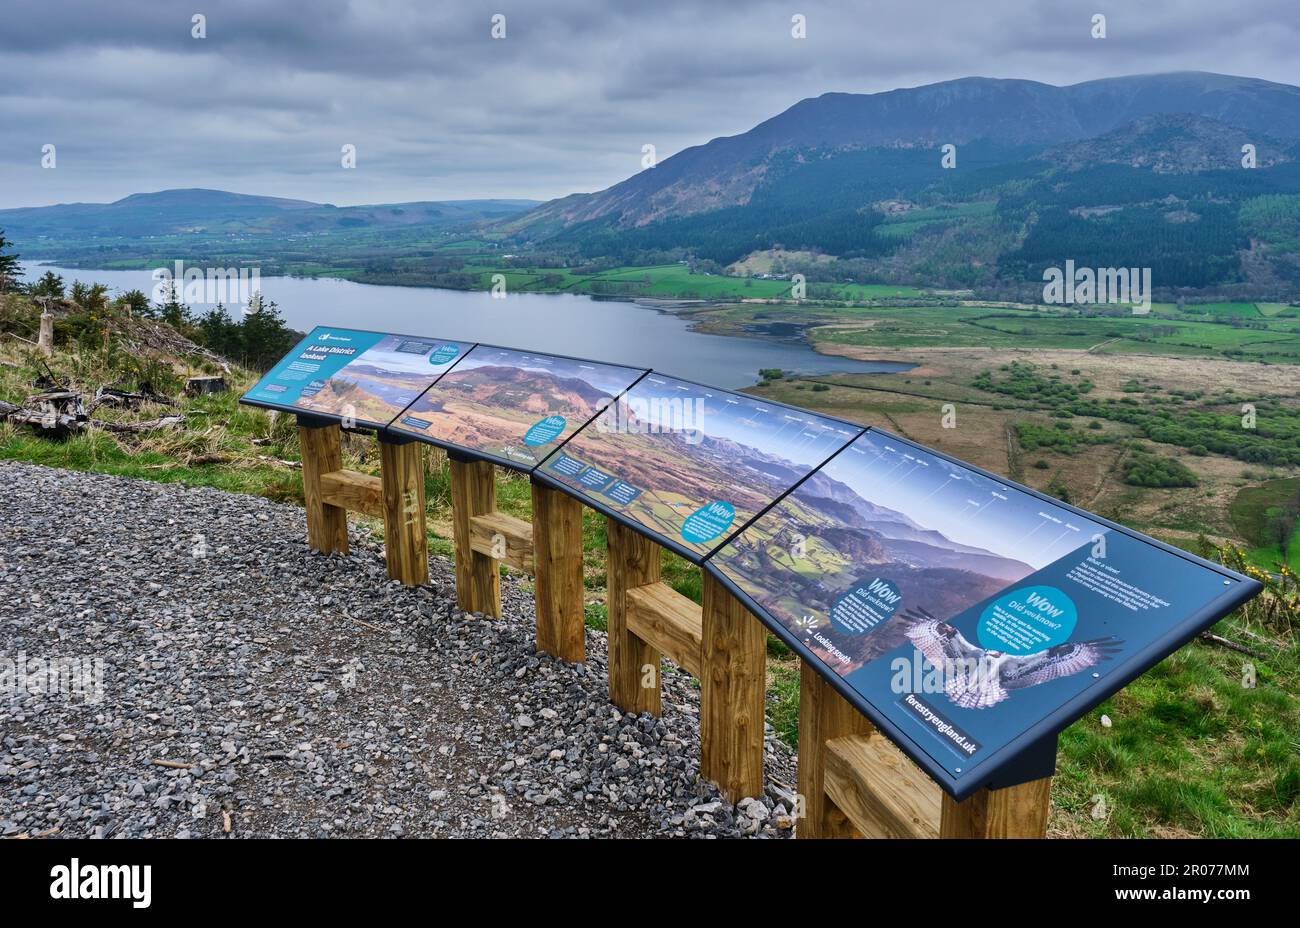 The Wow viewpoint (overlooking Bassenthwaite Lake and Ullock Pike and Dodd) on the Wow Trail at Whinlatter Forest Park near Keswick, Lake District, Cu Stock Photo